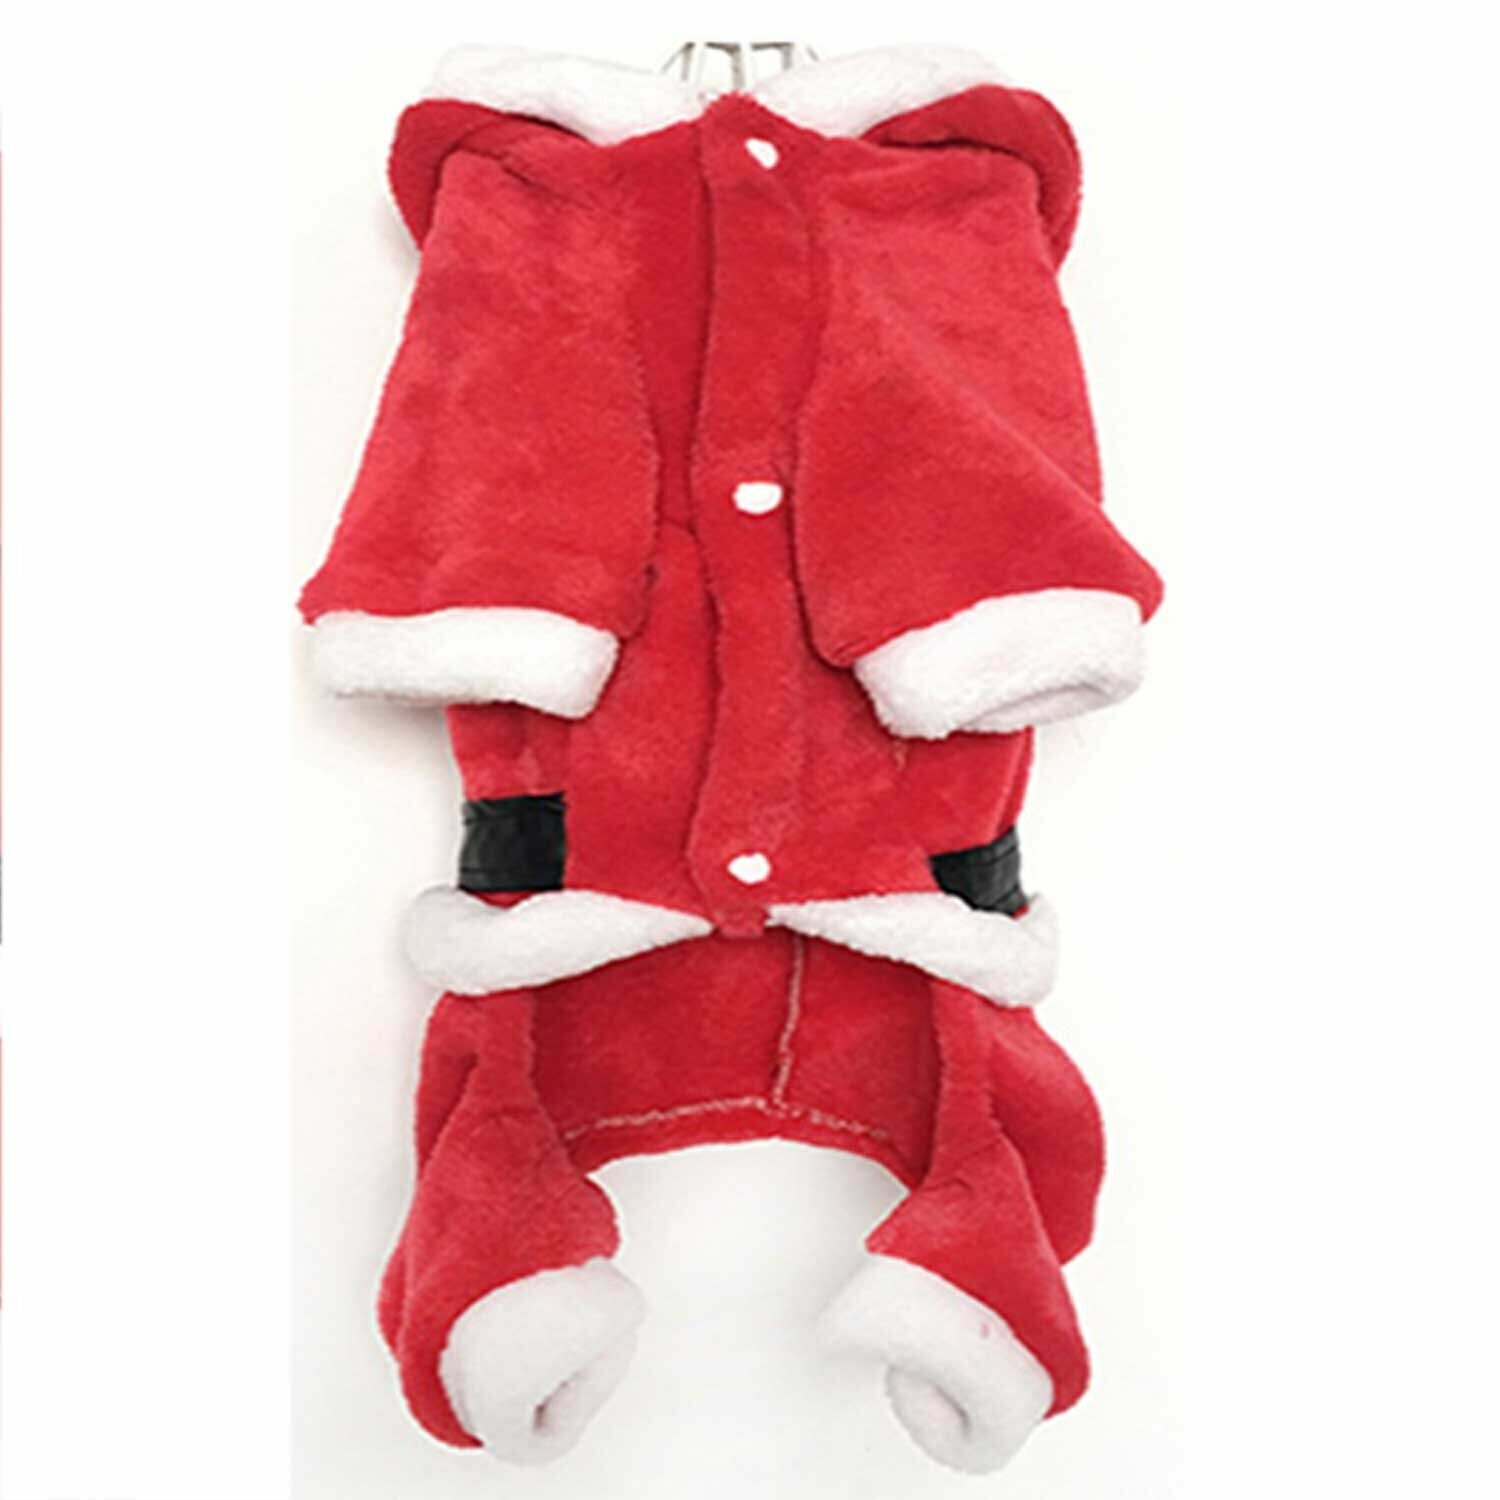 Santa Claus costume for dogs